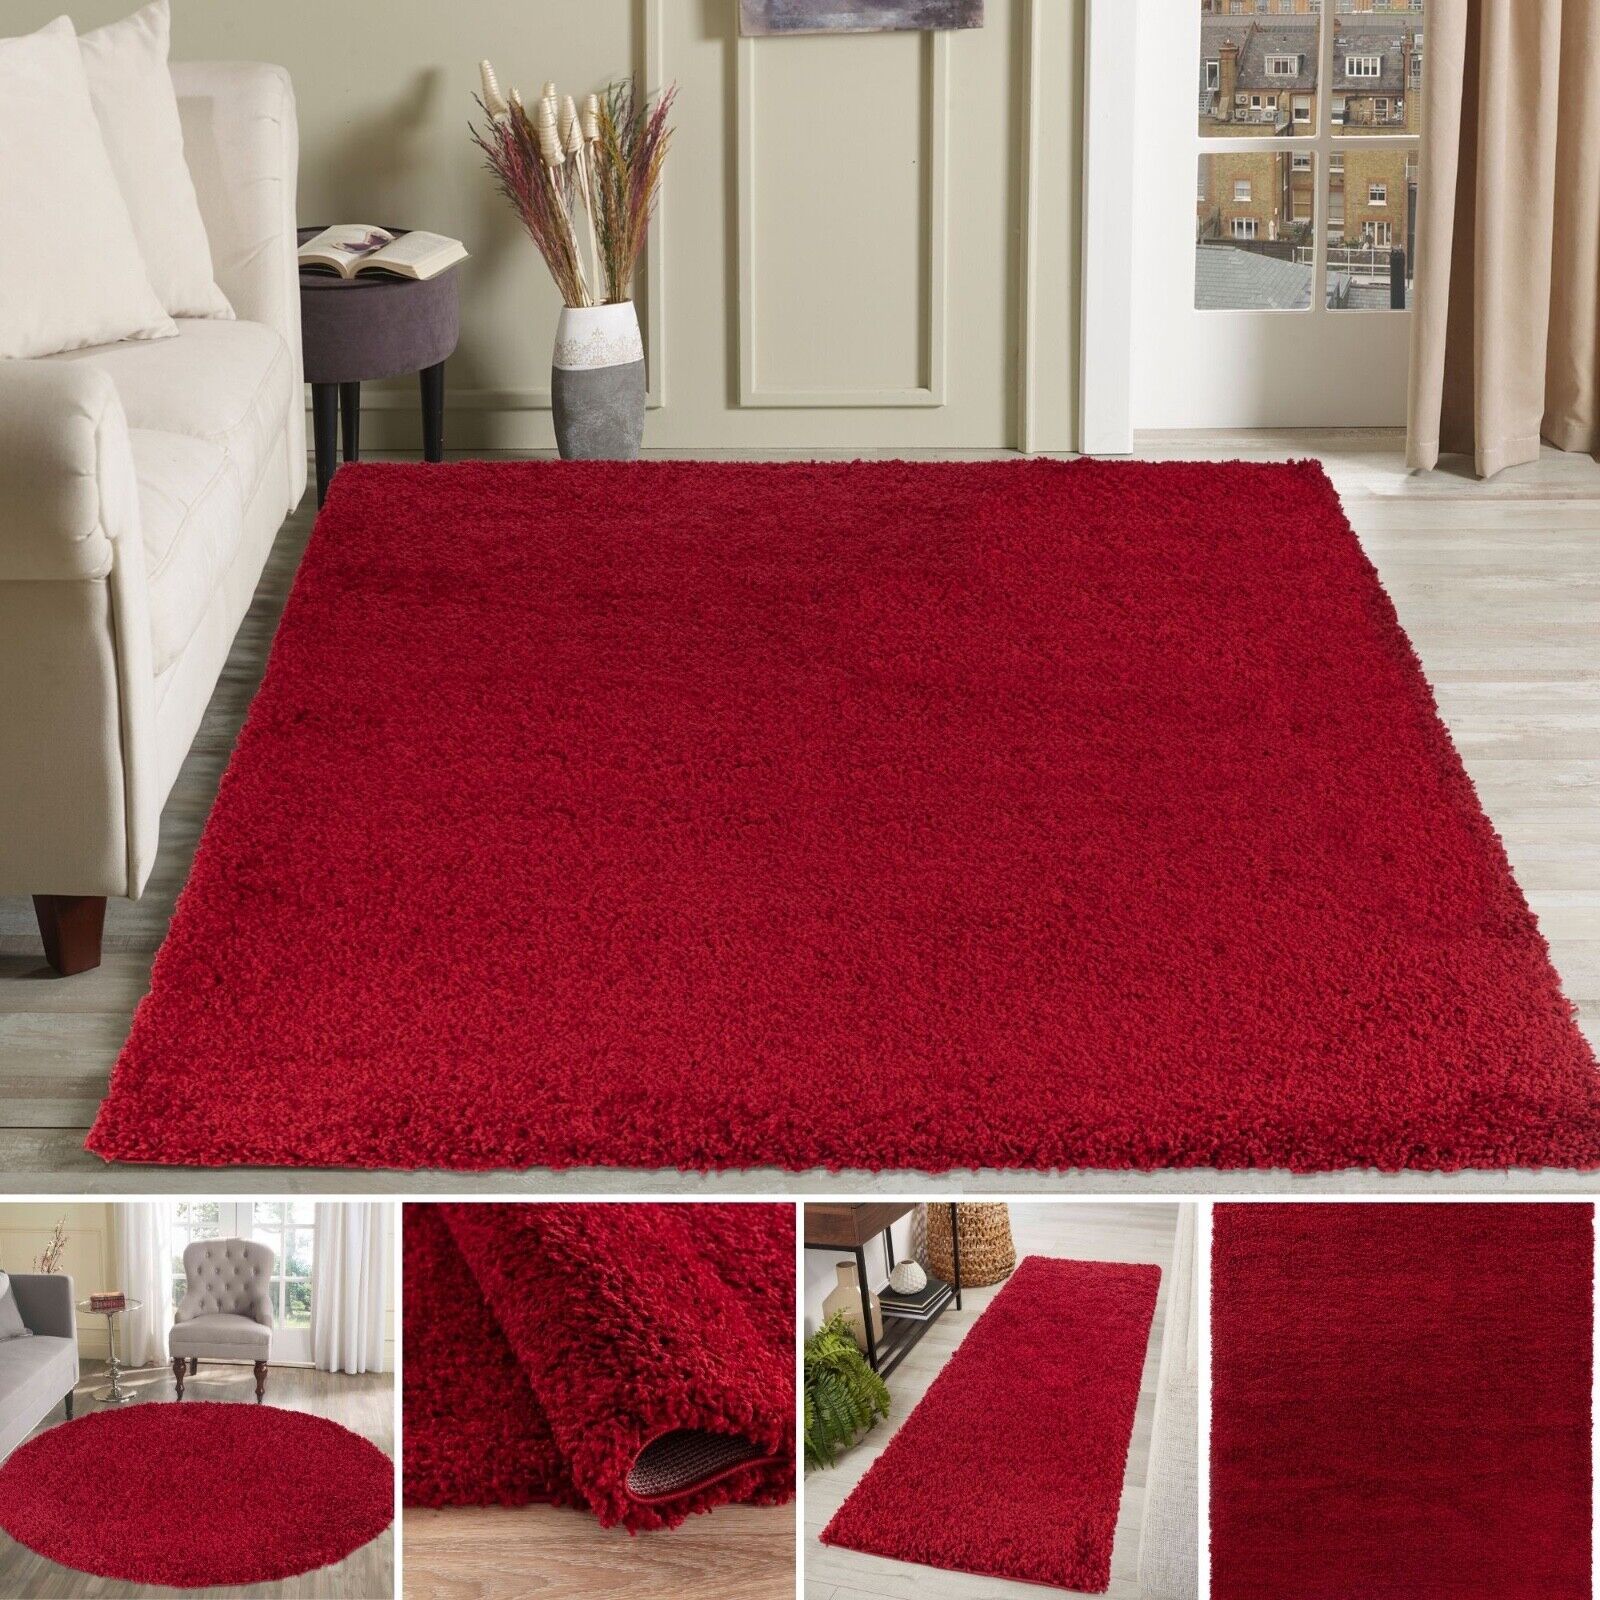 Modern Wine Red Burgundy Small – Large Living Room Area Plain Fluffy Shaggy  Rug | Ebay For Burgundy Rugs (View 7 of 15)